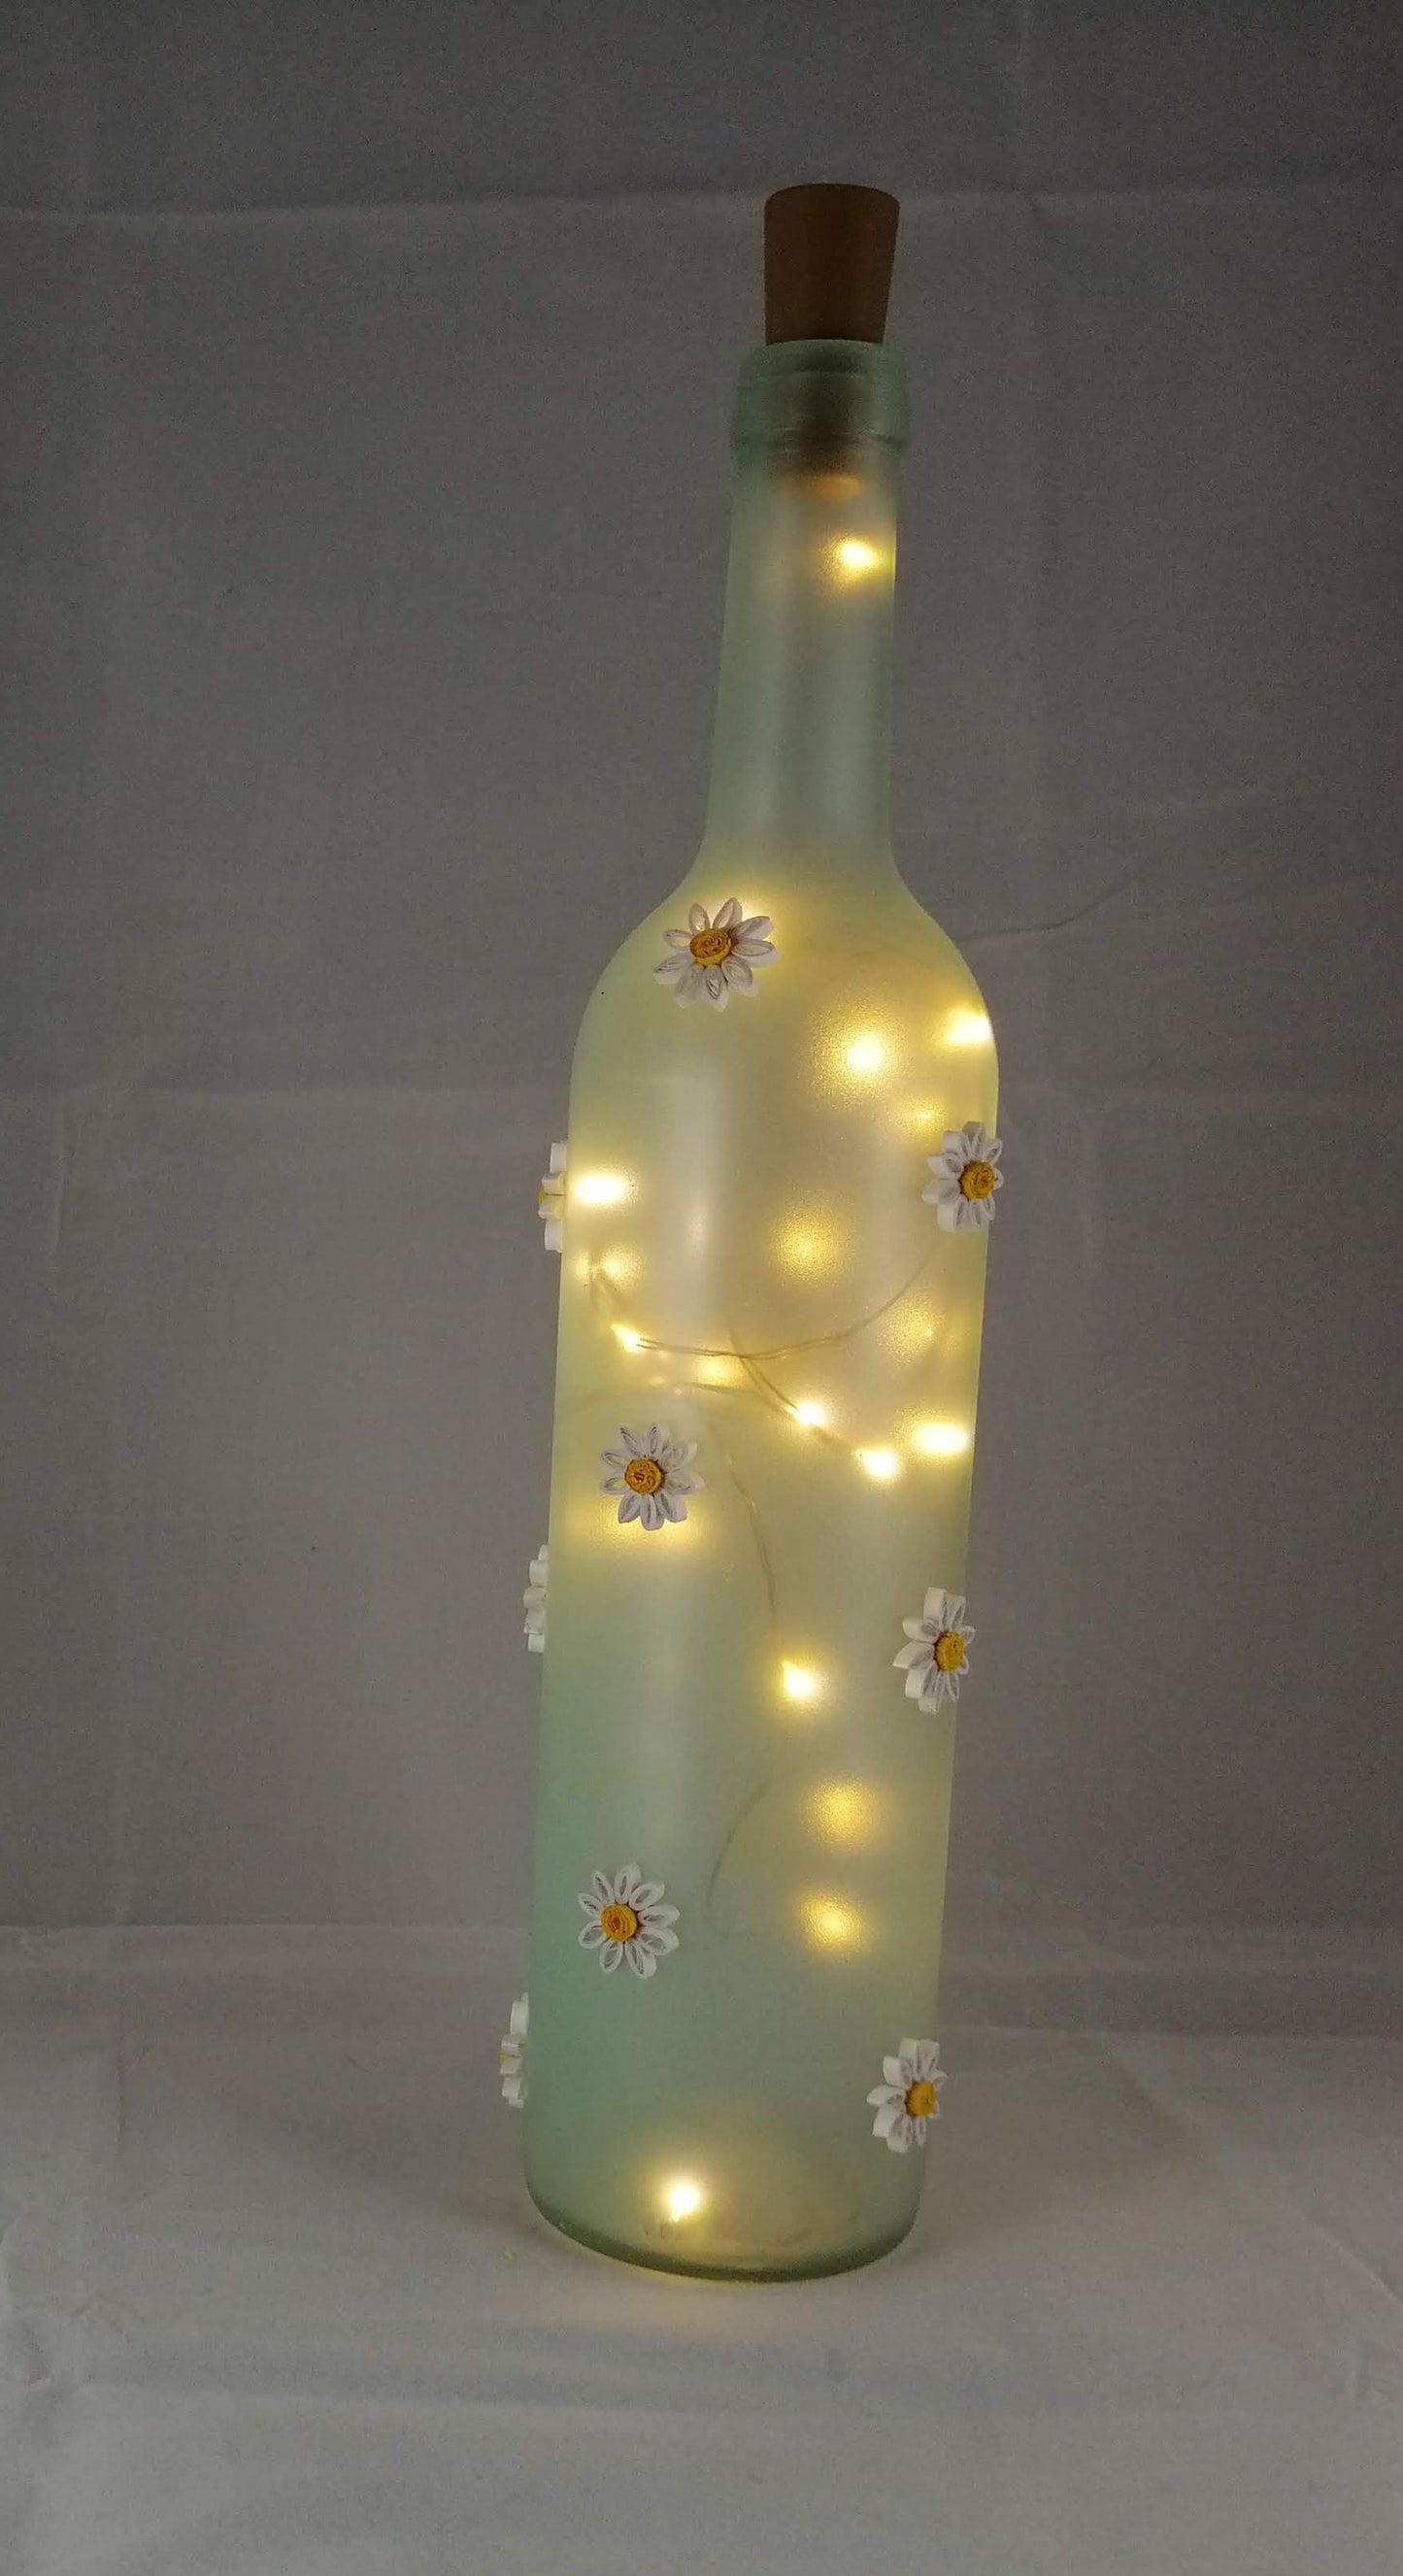 Glass bottle with daisies and lights